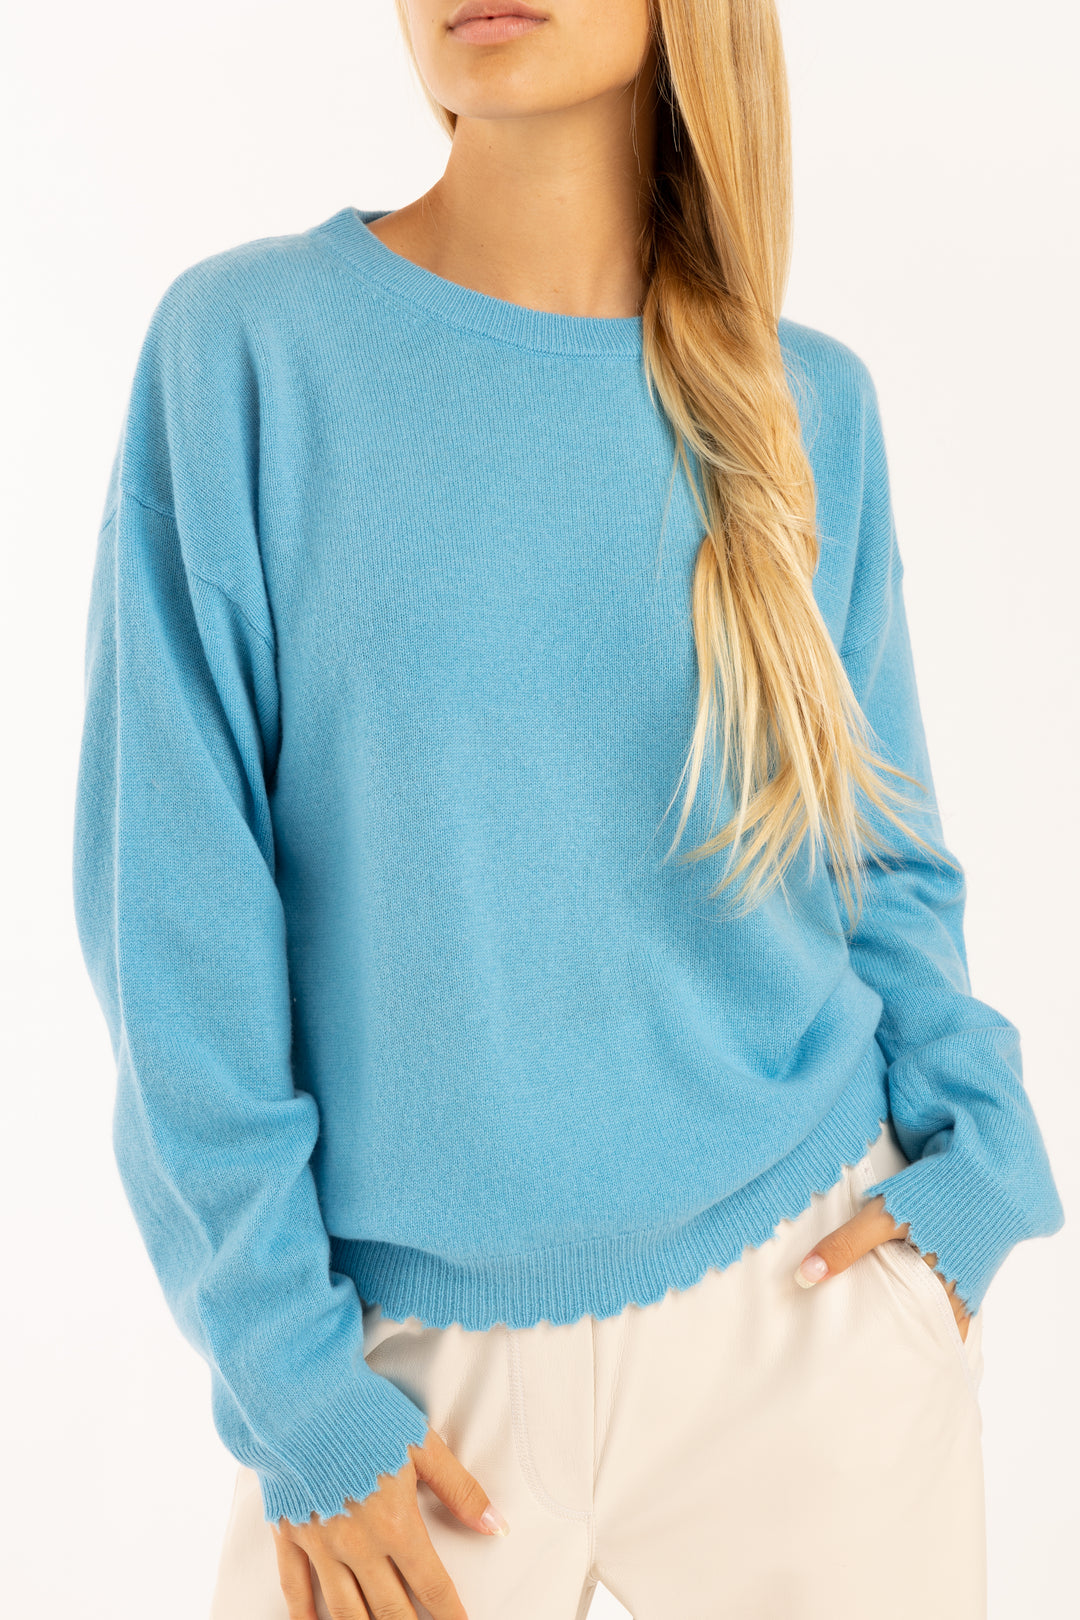 BOA FRAYED SWEATER - Kingfisher Road - Online Boutique